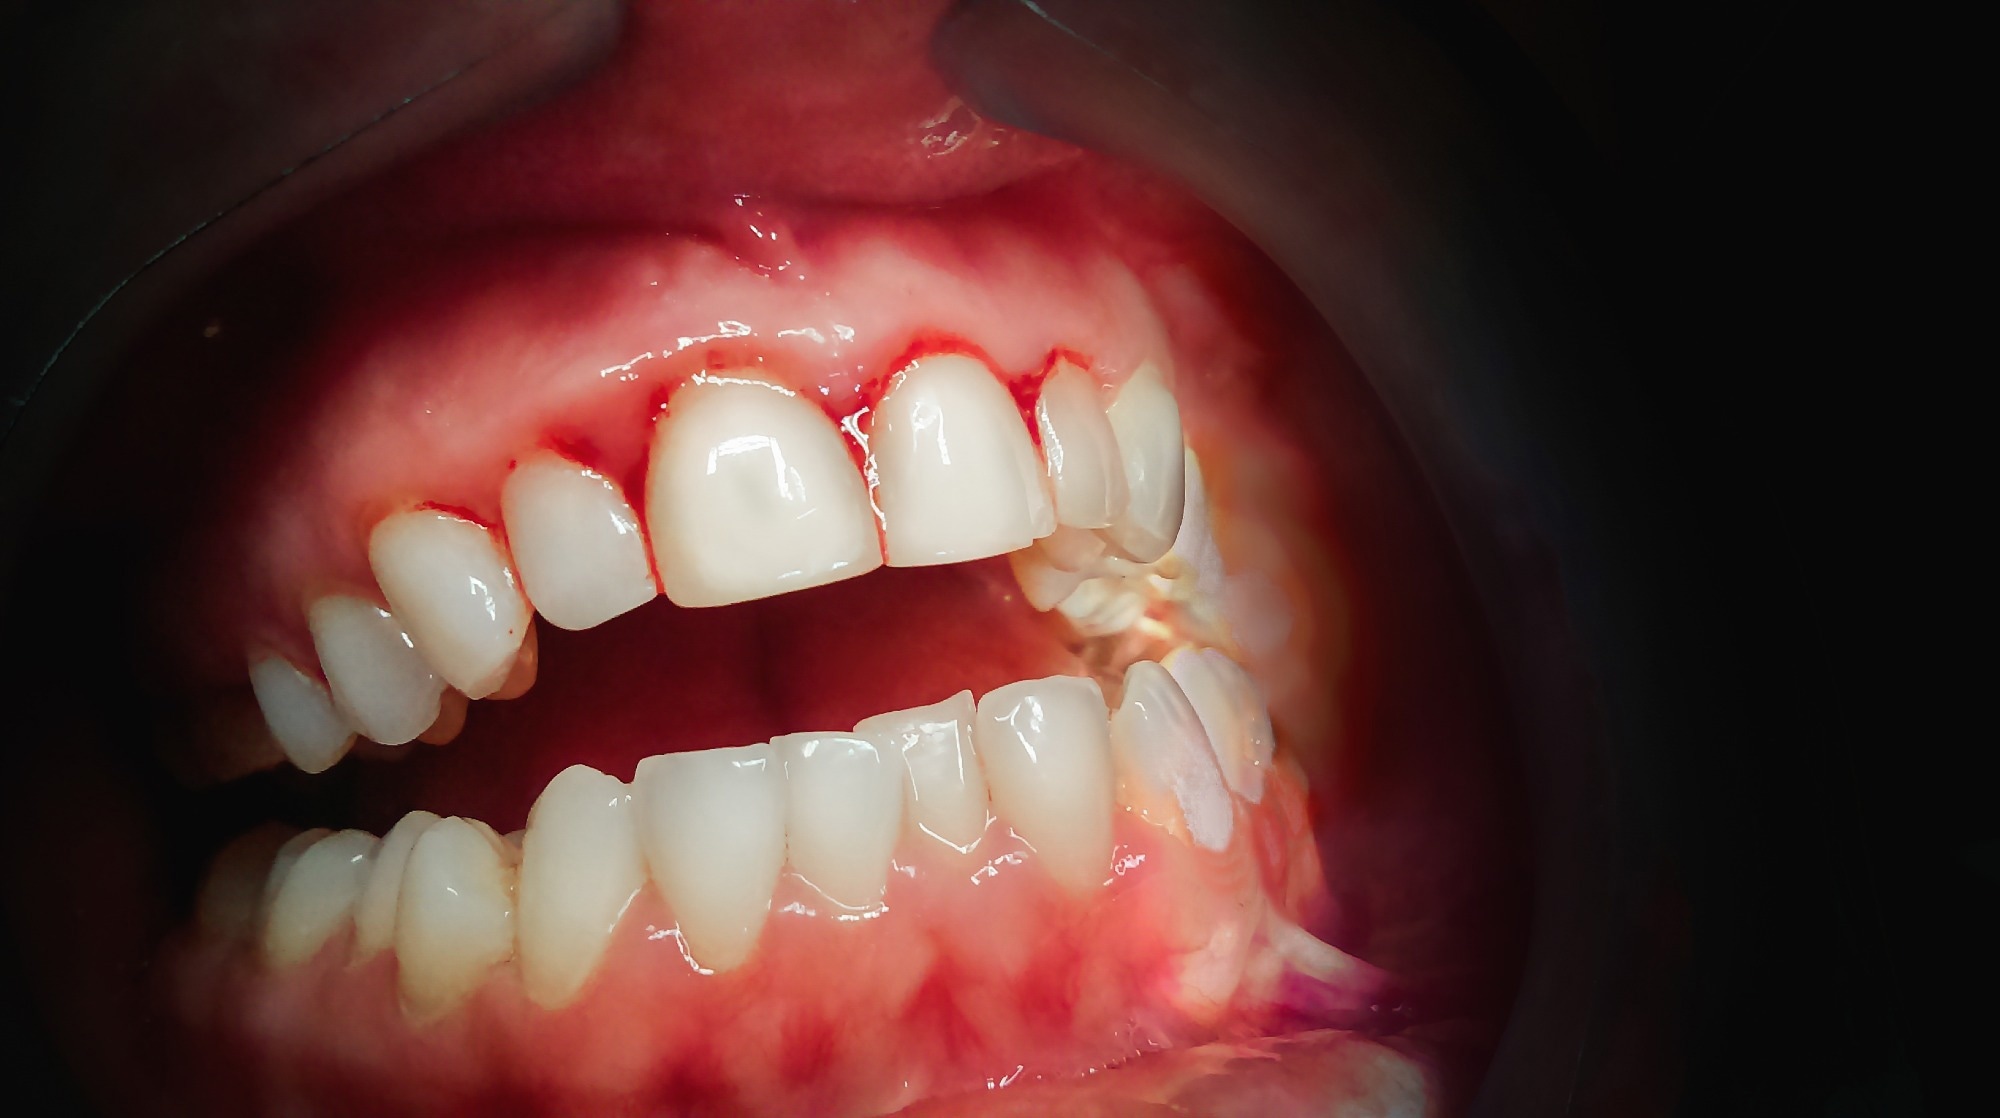 Study: Periodontitis and COVID-19: Immunological Characteristics, Related Pathways, and Association. Image Credit: Algirdas Gelazius / Shutterstock